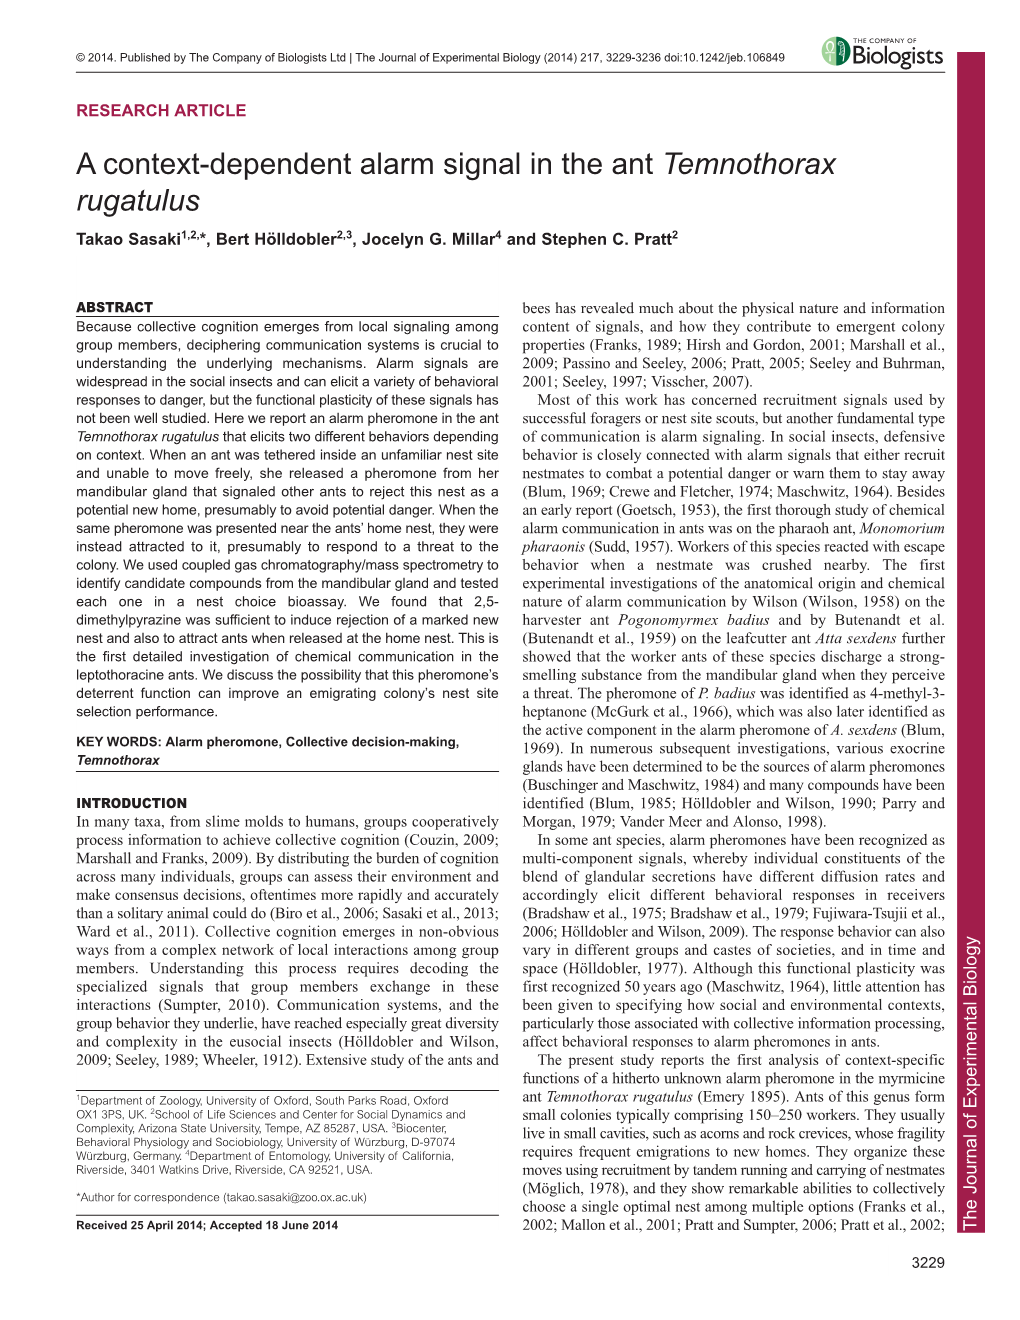 A Context-Dependent Alarm Signal in the Ant Temnothorax Rugatulus